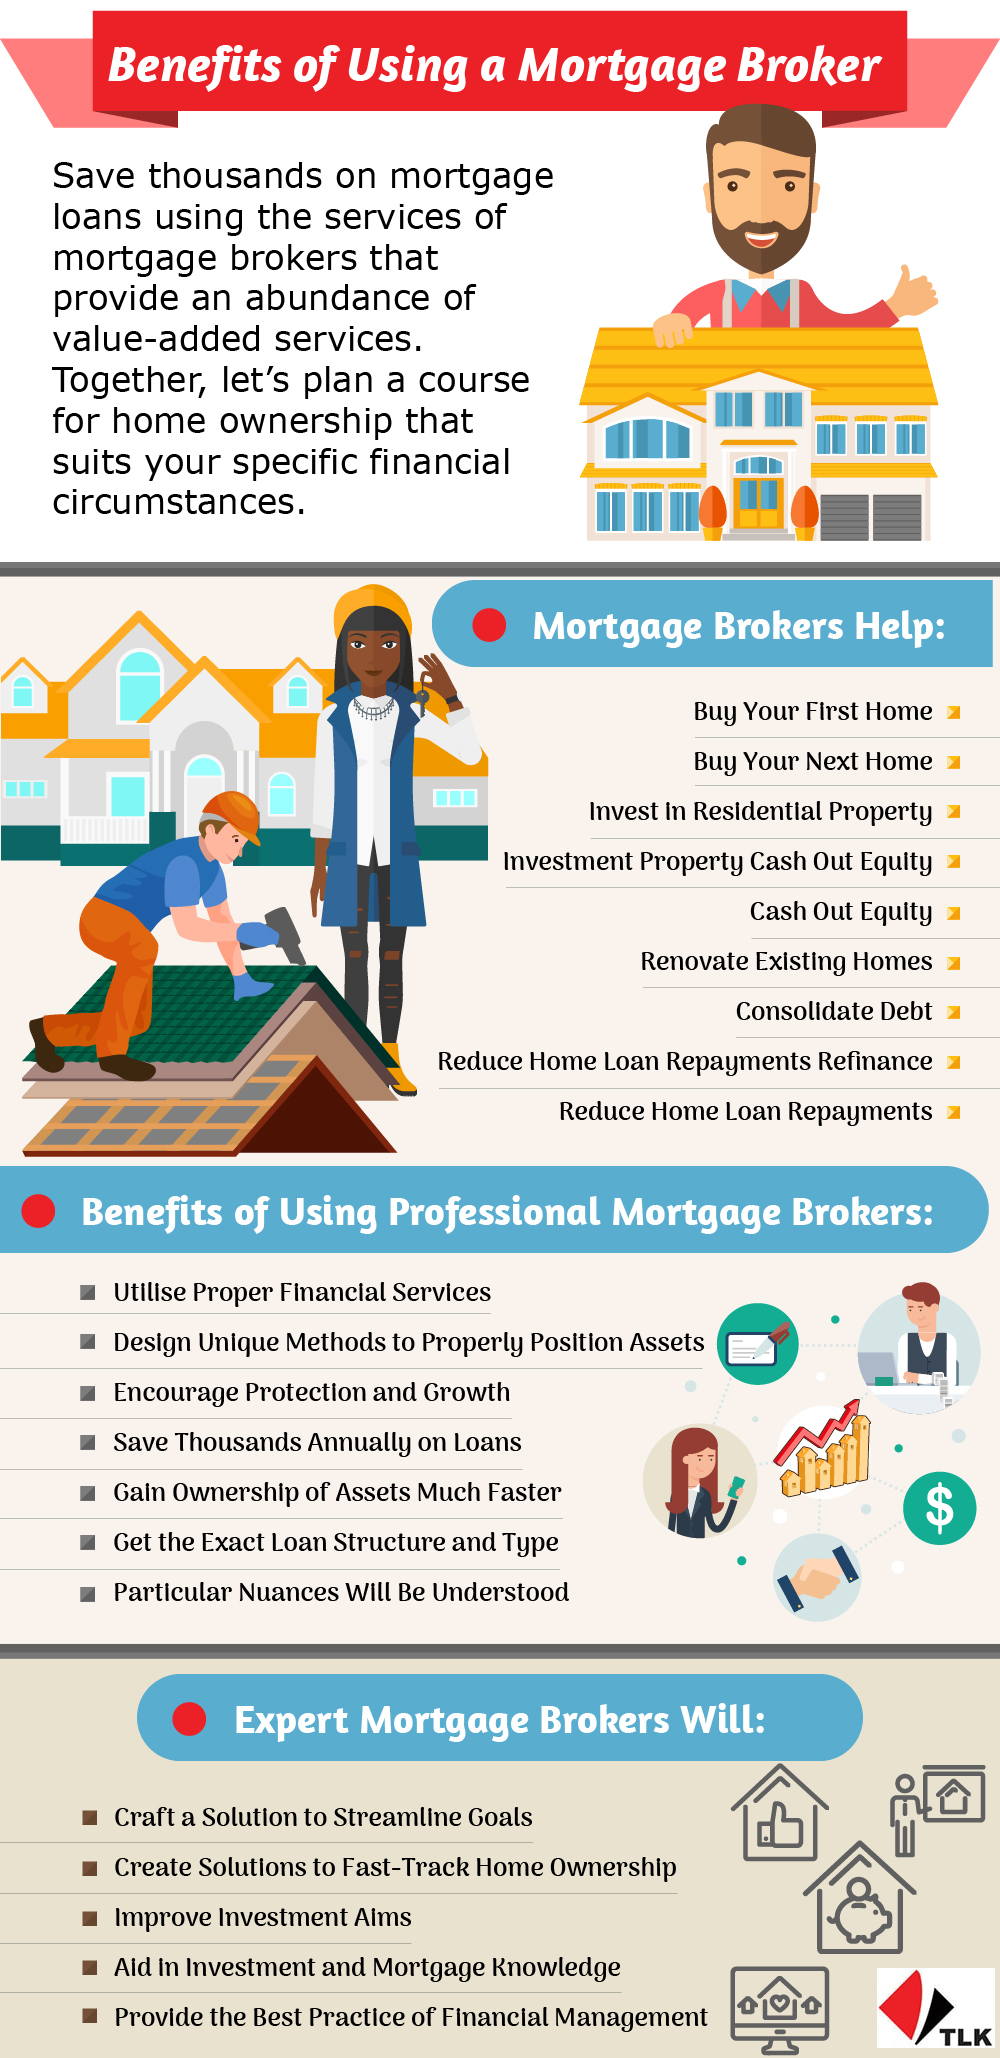 Benefits of Using a Mortgage Broker